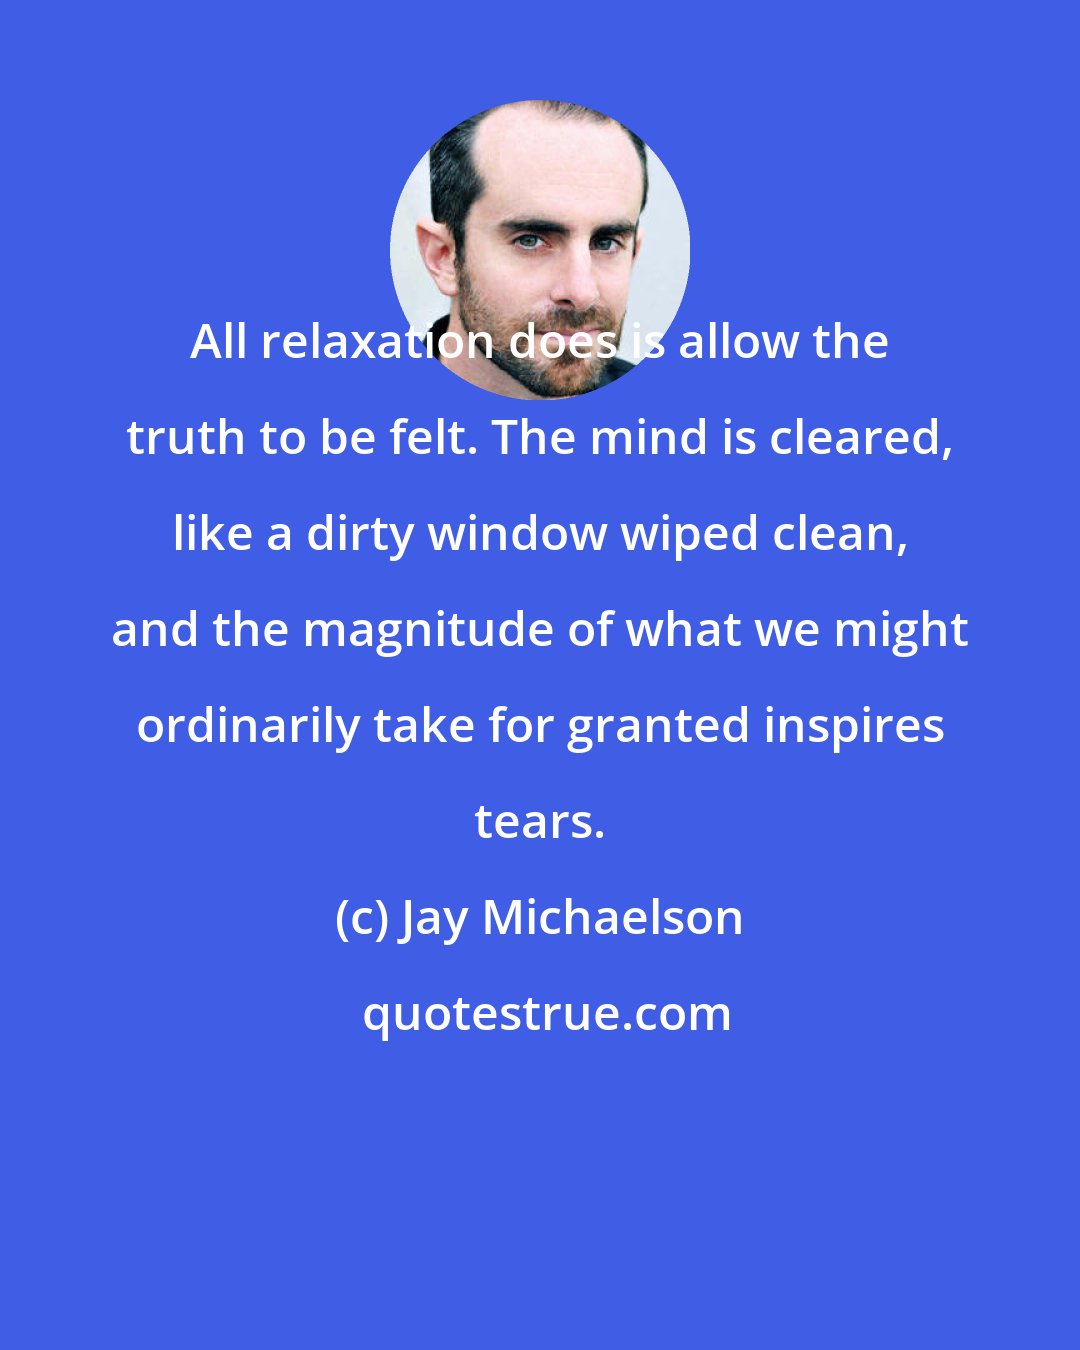 Jay Michaelson: All relaxation does is allow the truth to be felt. The mind is cleared, like a dirty window wiped clean, and the magnitude of what we might ordinarily take for granted inspires tears.